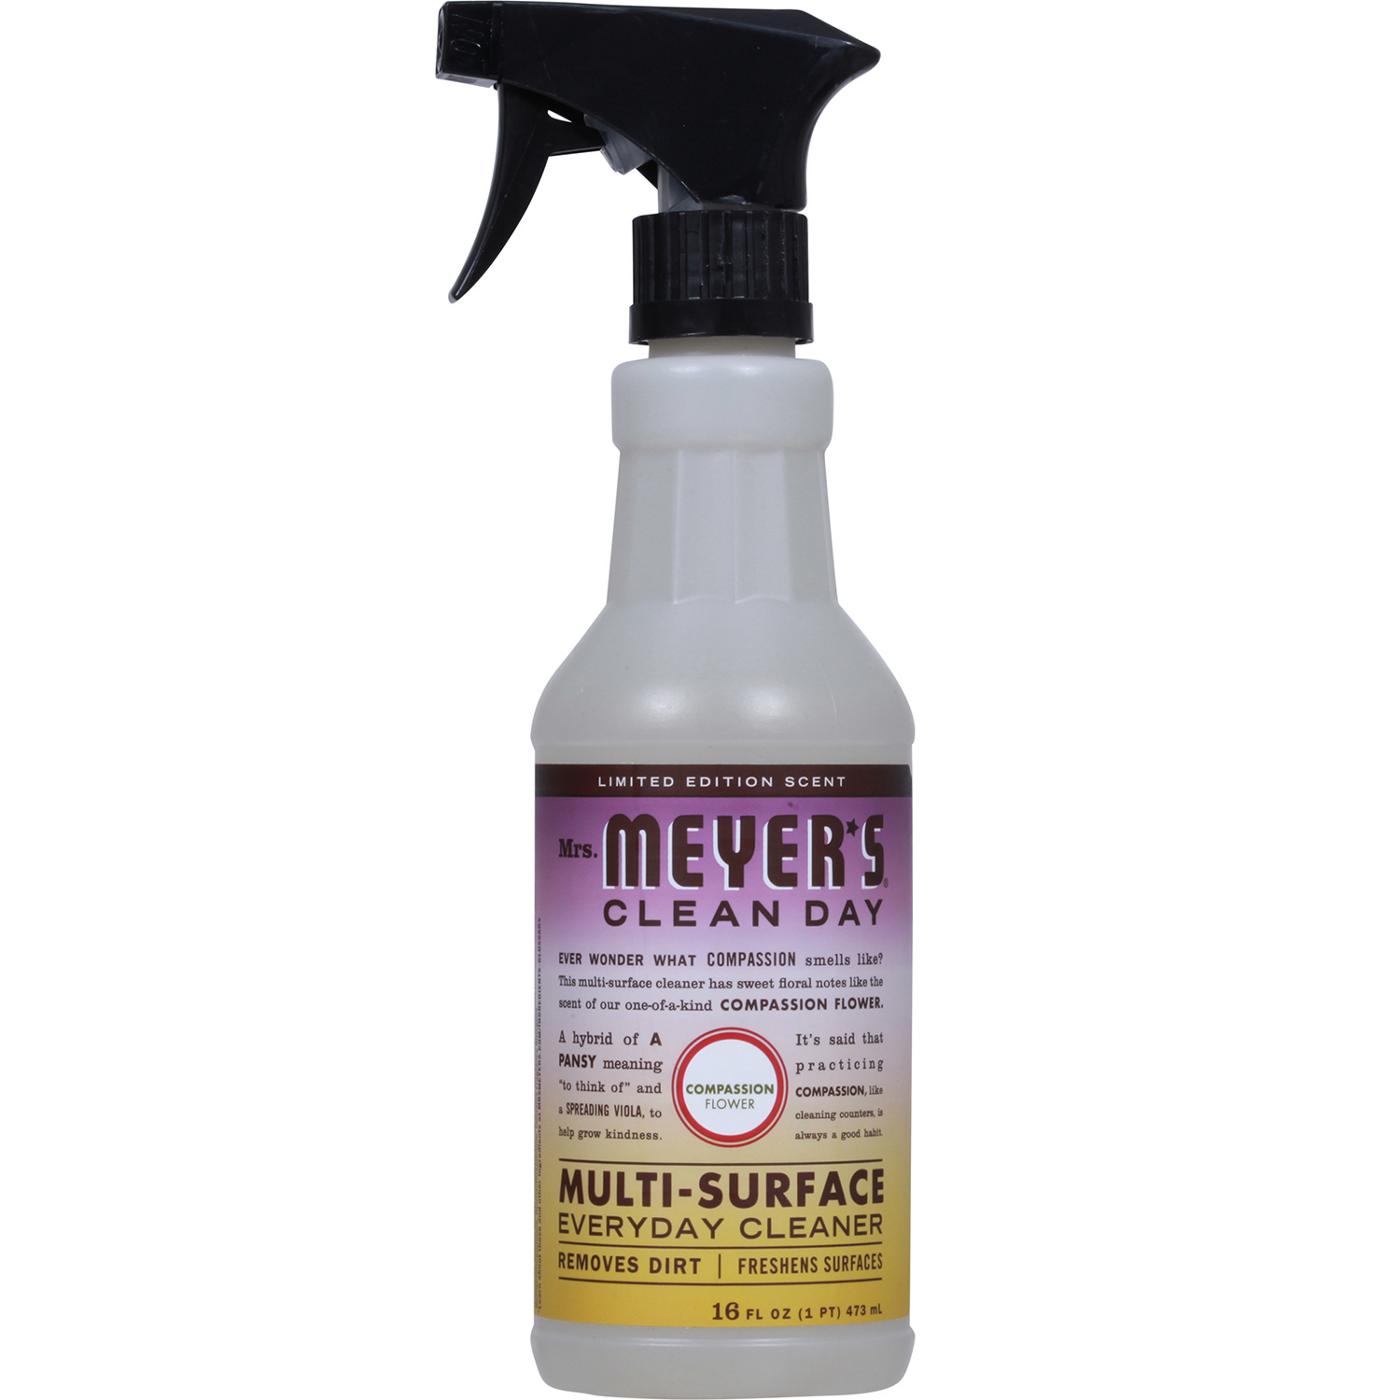 Mrs. Meyer's Clean Day Compassion Flower Multi-Surface Everyday Cleaner Spray; image 1 of 4